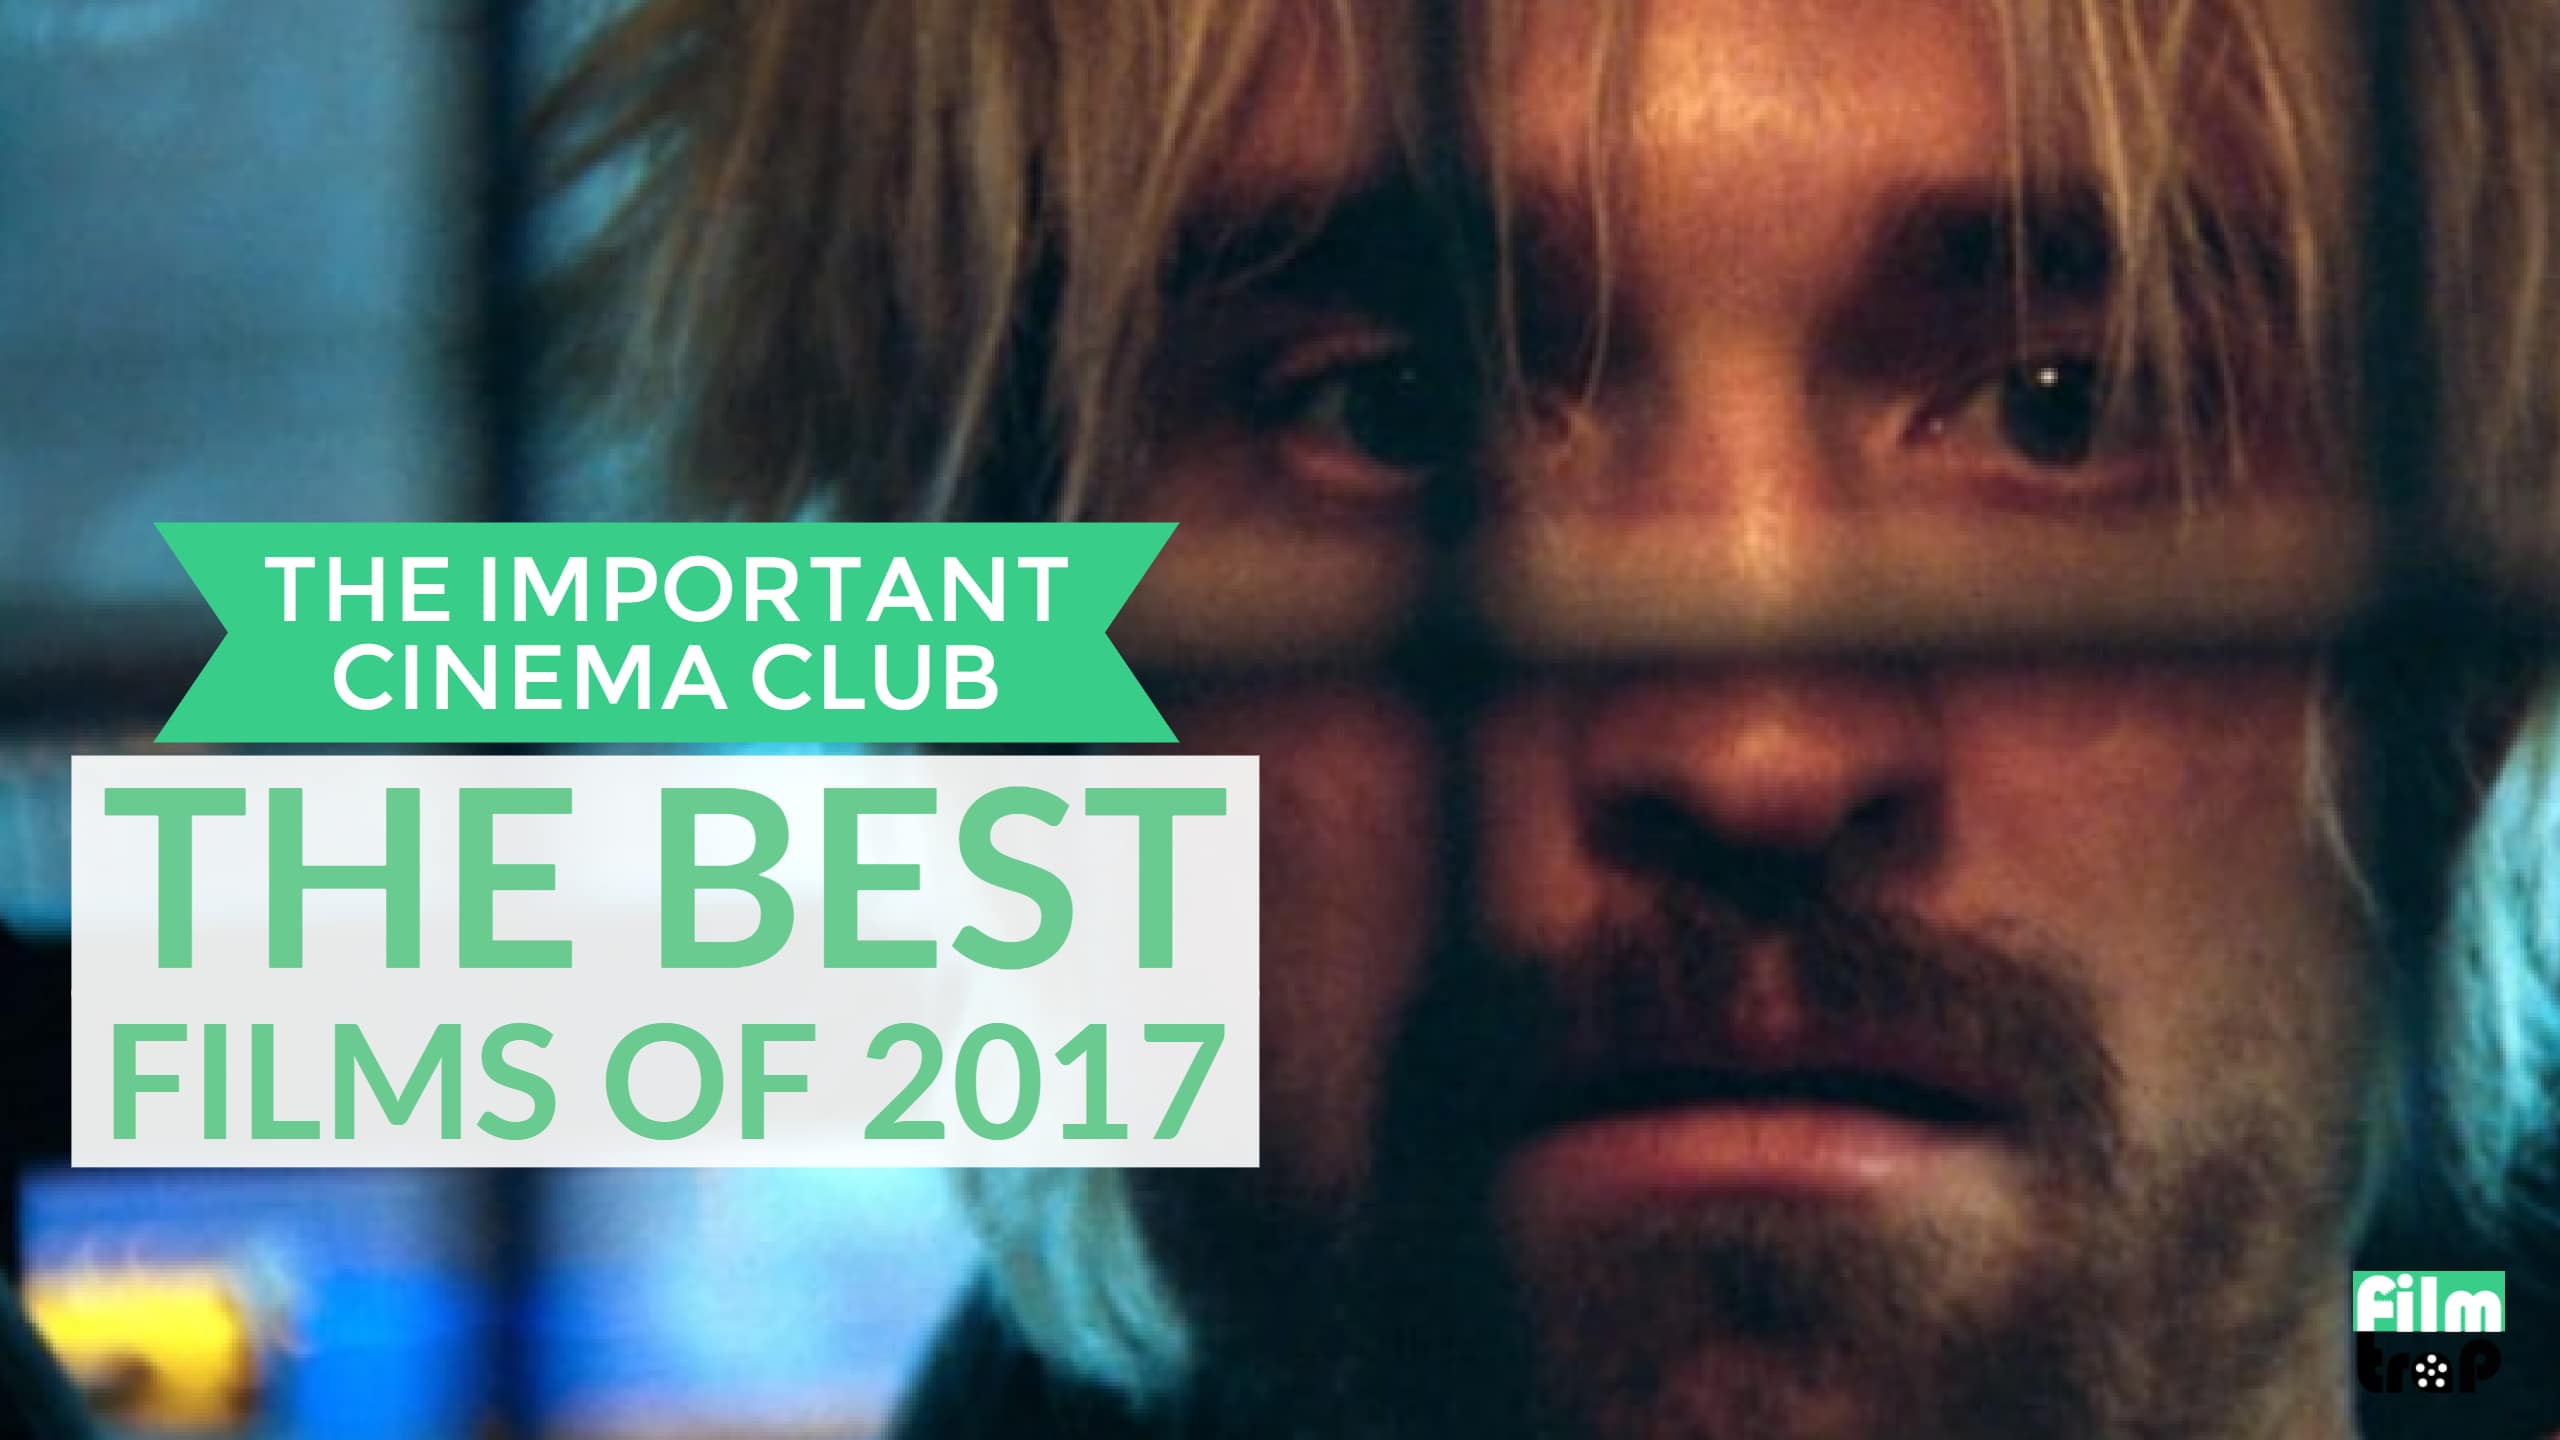 The Best Films of 2017